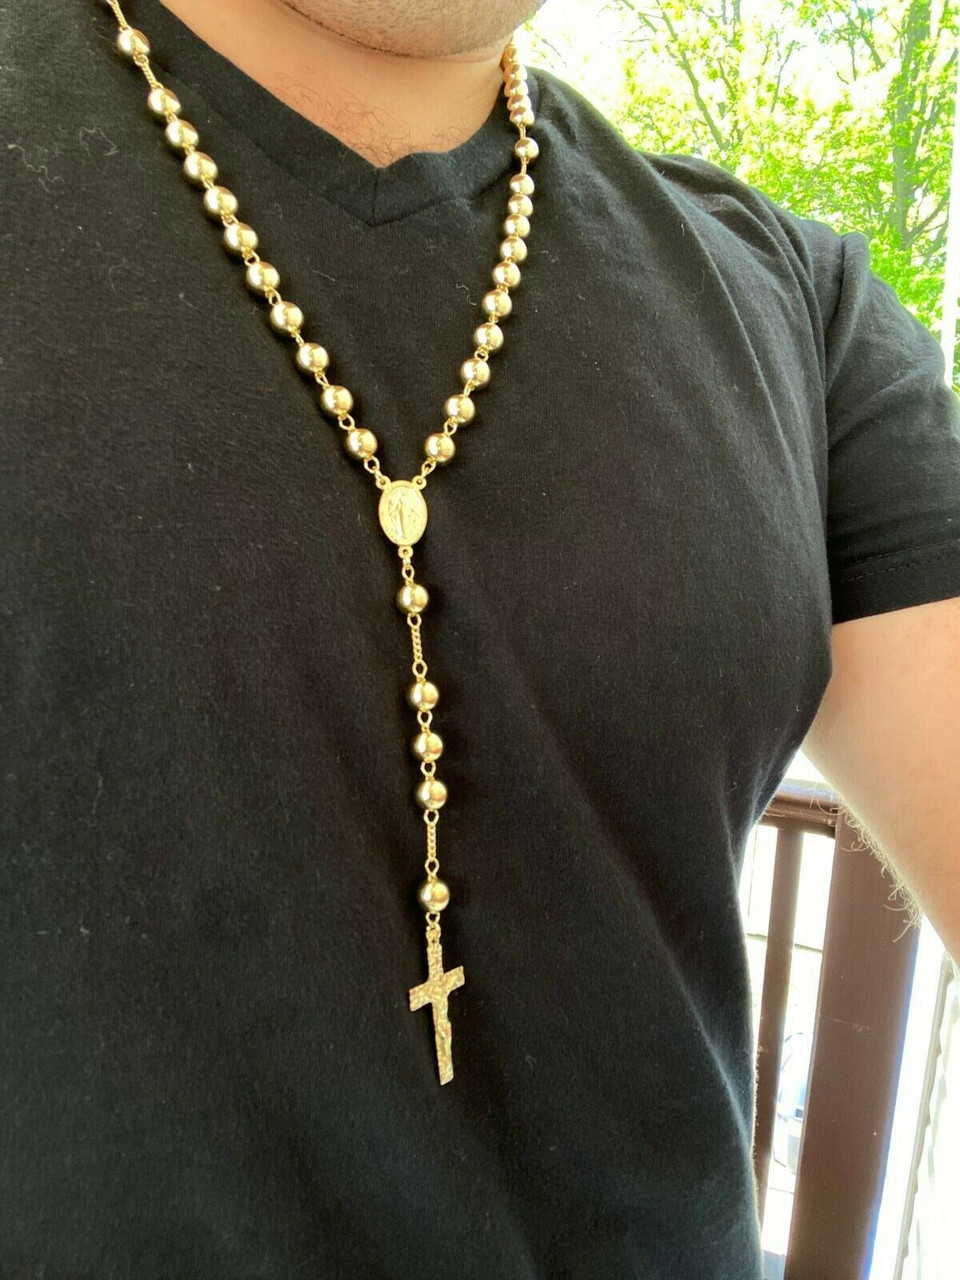 14k Gold Over Solid 925 Silver Men's Rosary Beads Necklace Rosario Large  Hip Hop